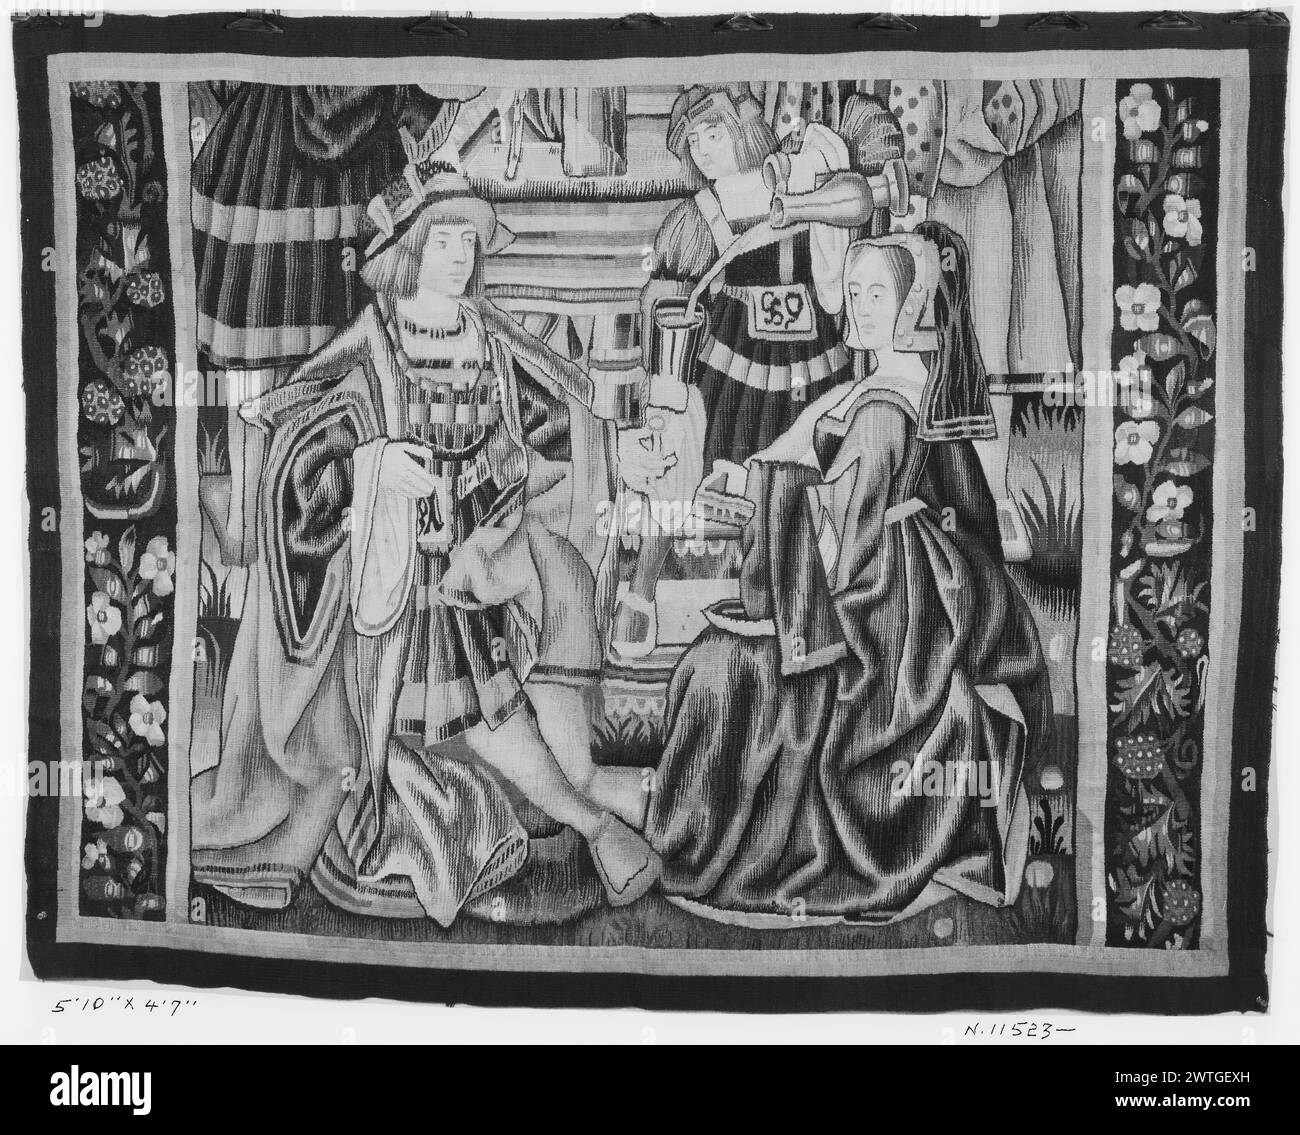 Court scene . unknown c. 1500-1520 Tapestry Dimensions: H 4'7' x W 5'10' Tapestry Materials/Techniques: unknown Culture: Southern Netherlands Weaving Center: unknown Ownership History: French & Co. purchased from Henry Symons Inc. 9/22/192[7?]. Lady & noblemen sitting next to one another, served glass of wine from vessel by servant; other [cropped] figures in background (L & R BRD) twisting vines with oversize flowers Tapestry appears to be cropped at both the top & bottom, & the upper & lower borders are missing. French & Co. stock sheet in archive, 15281 Stock Photo